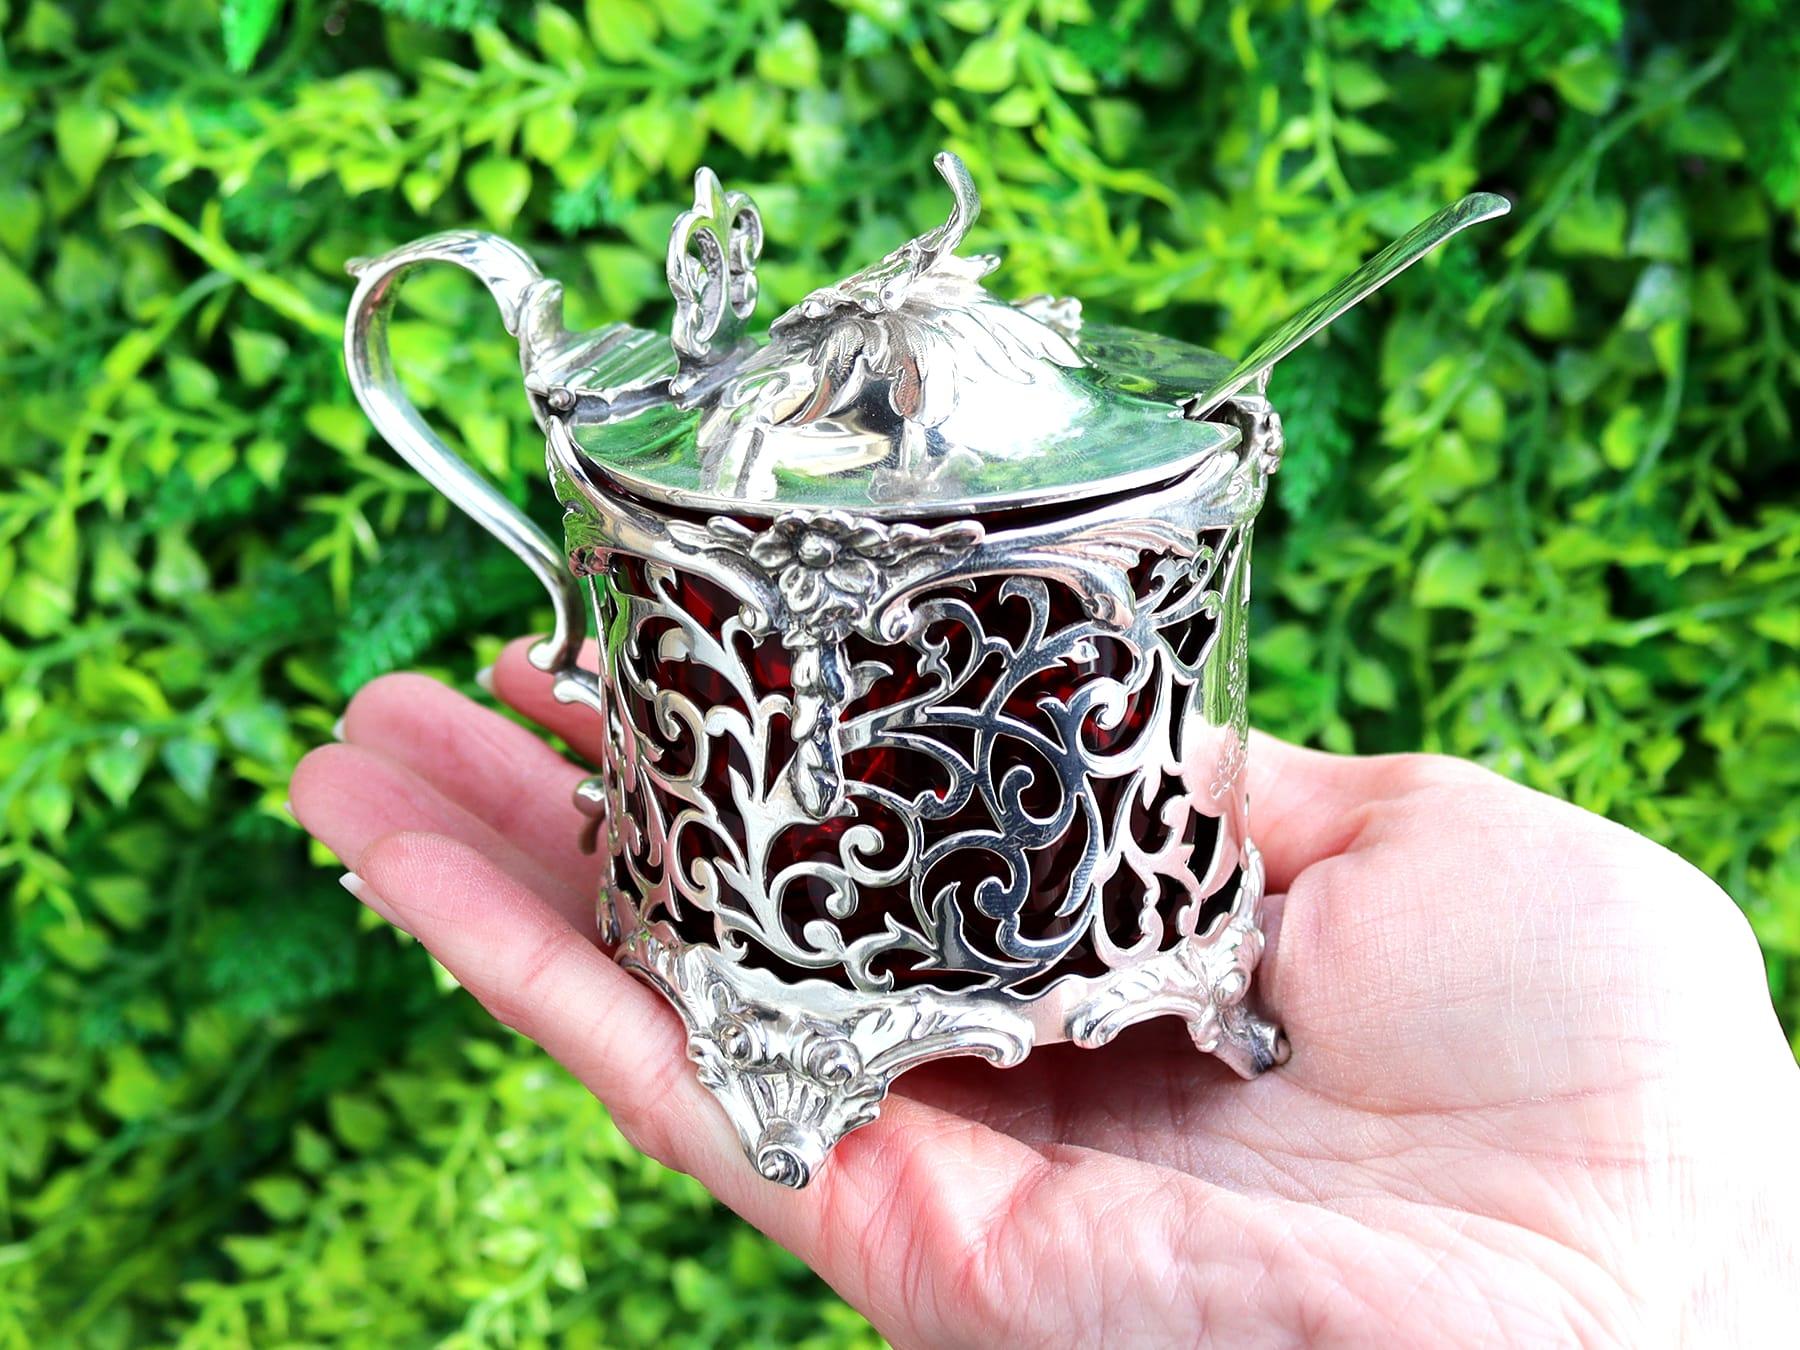 An exceptional, fine and impressive, large antique Victorian sterling silver and cranberry coloured glass mustard pot; an addition to our Victorian silver cruets/condiments collection.

This exceptional antique Victorian sterling silver mustard pot